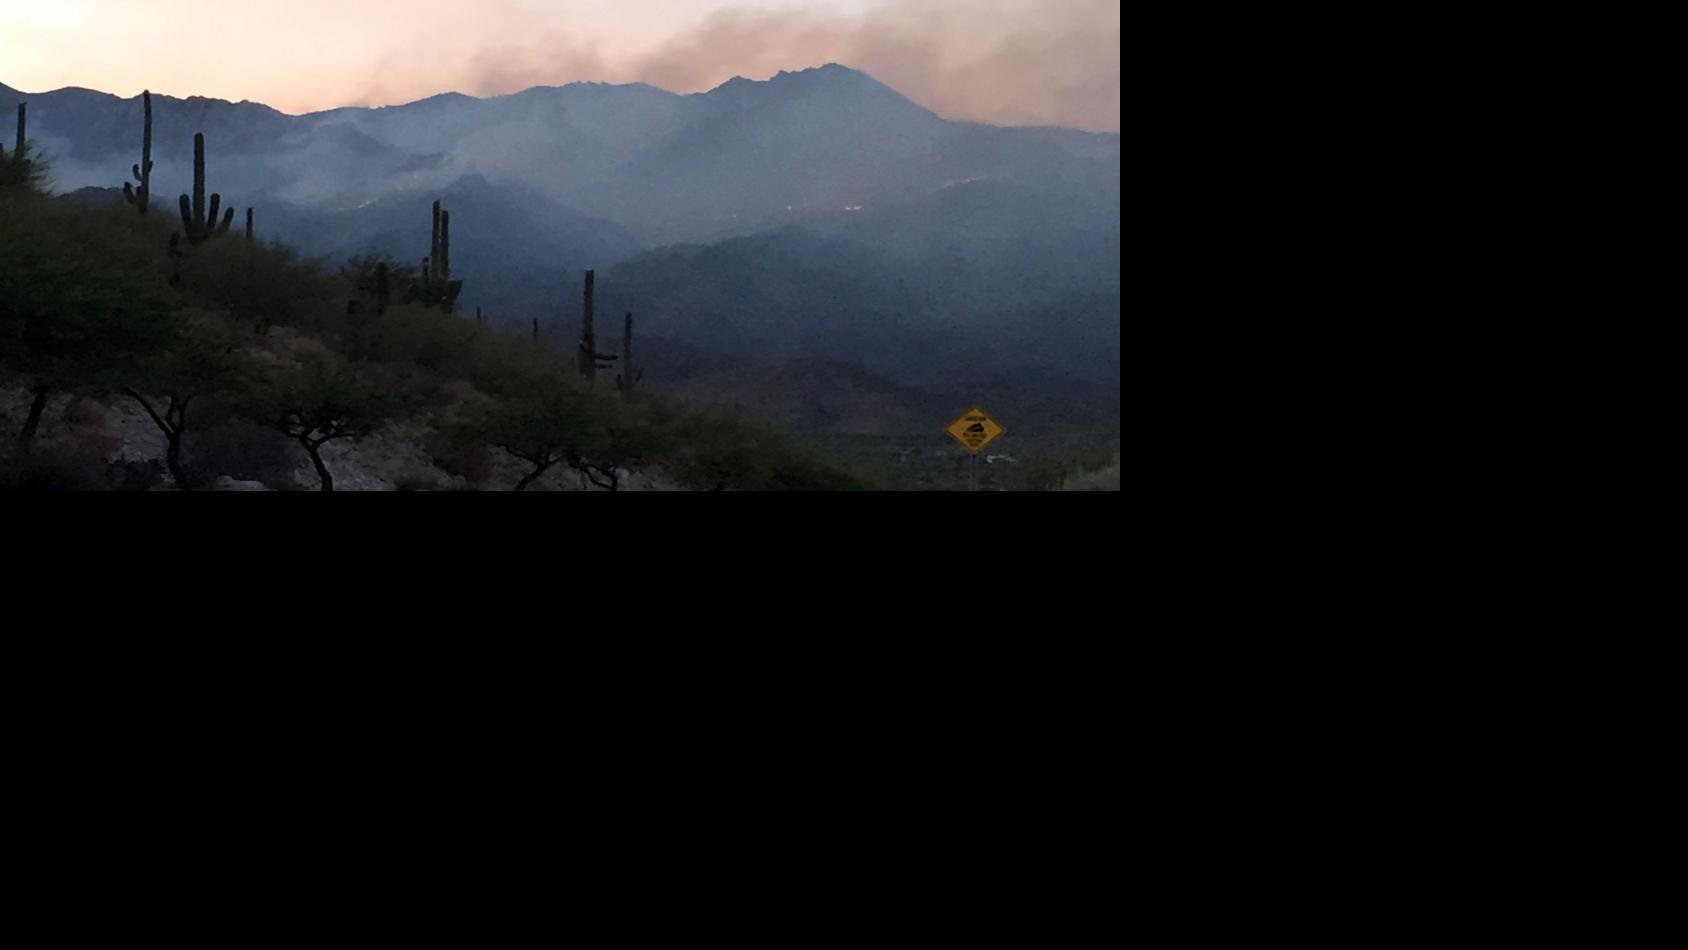 Tucson's Bighorn Fire Pocket fires boosting smoke over the city